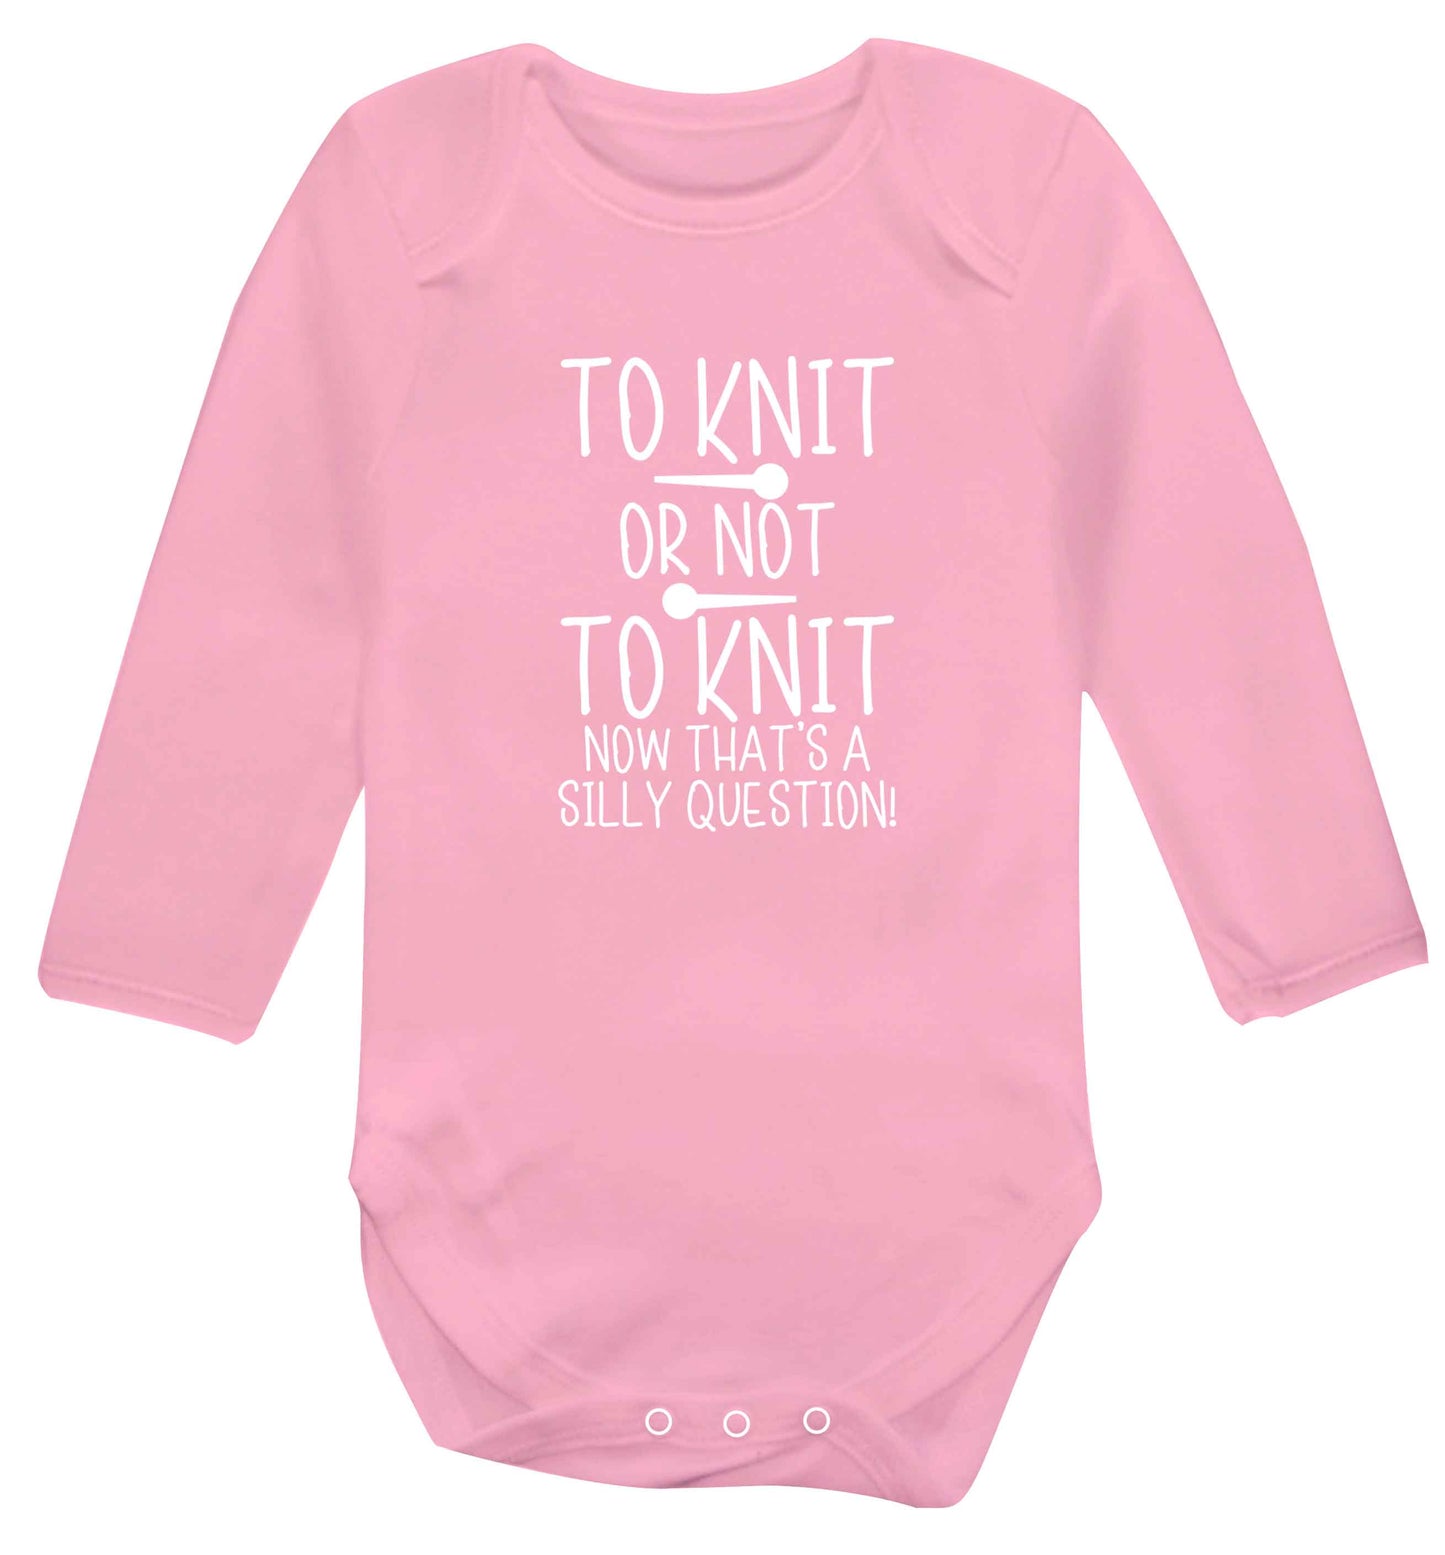 To knit or not to knit now that's a silly question baby vest long sleeved pale pink 6-12 months